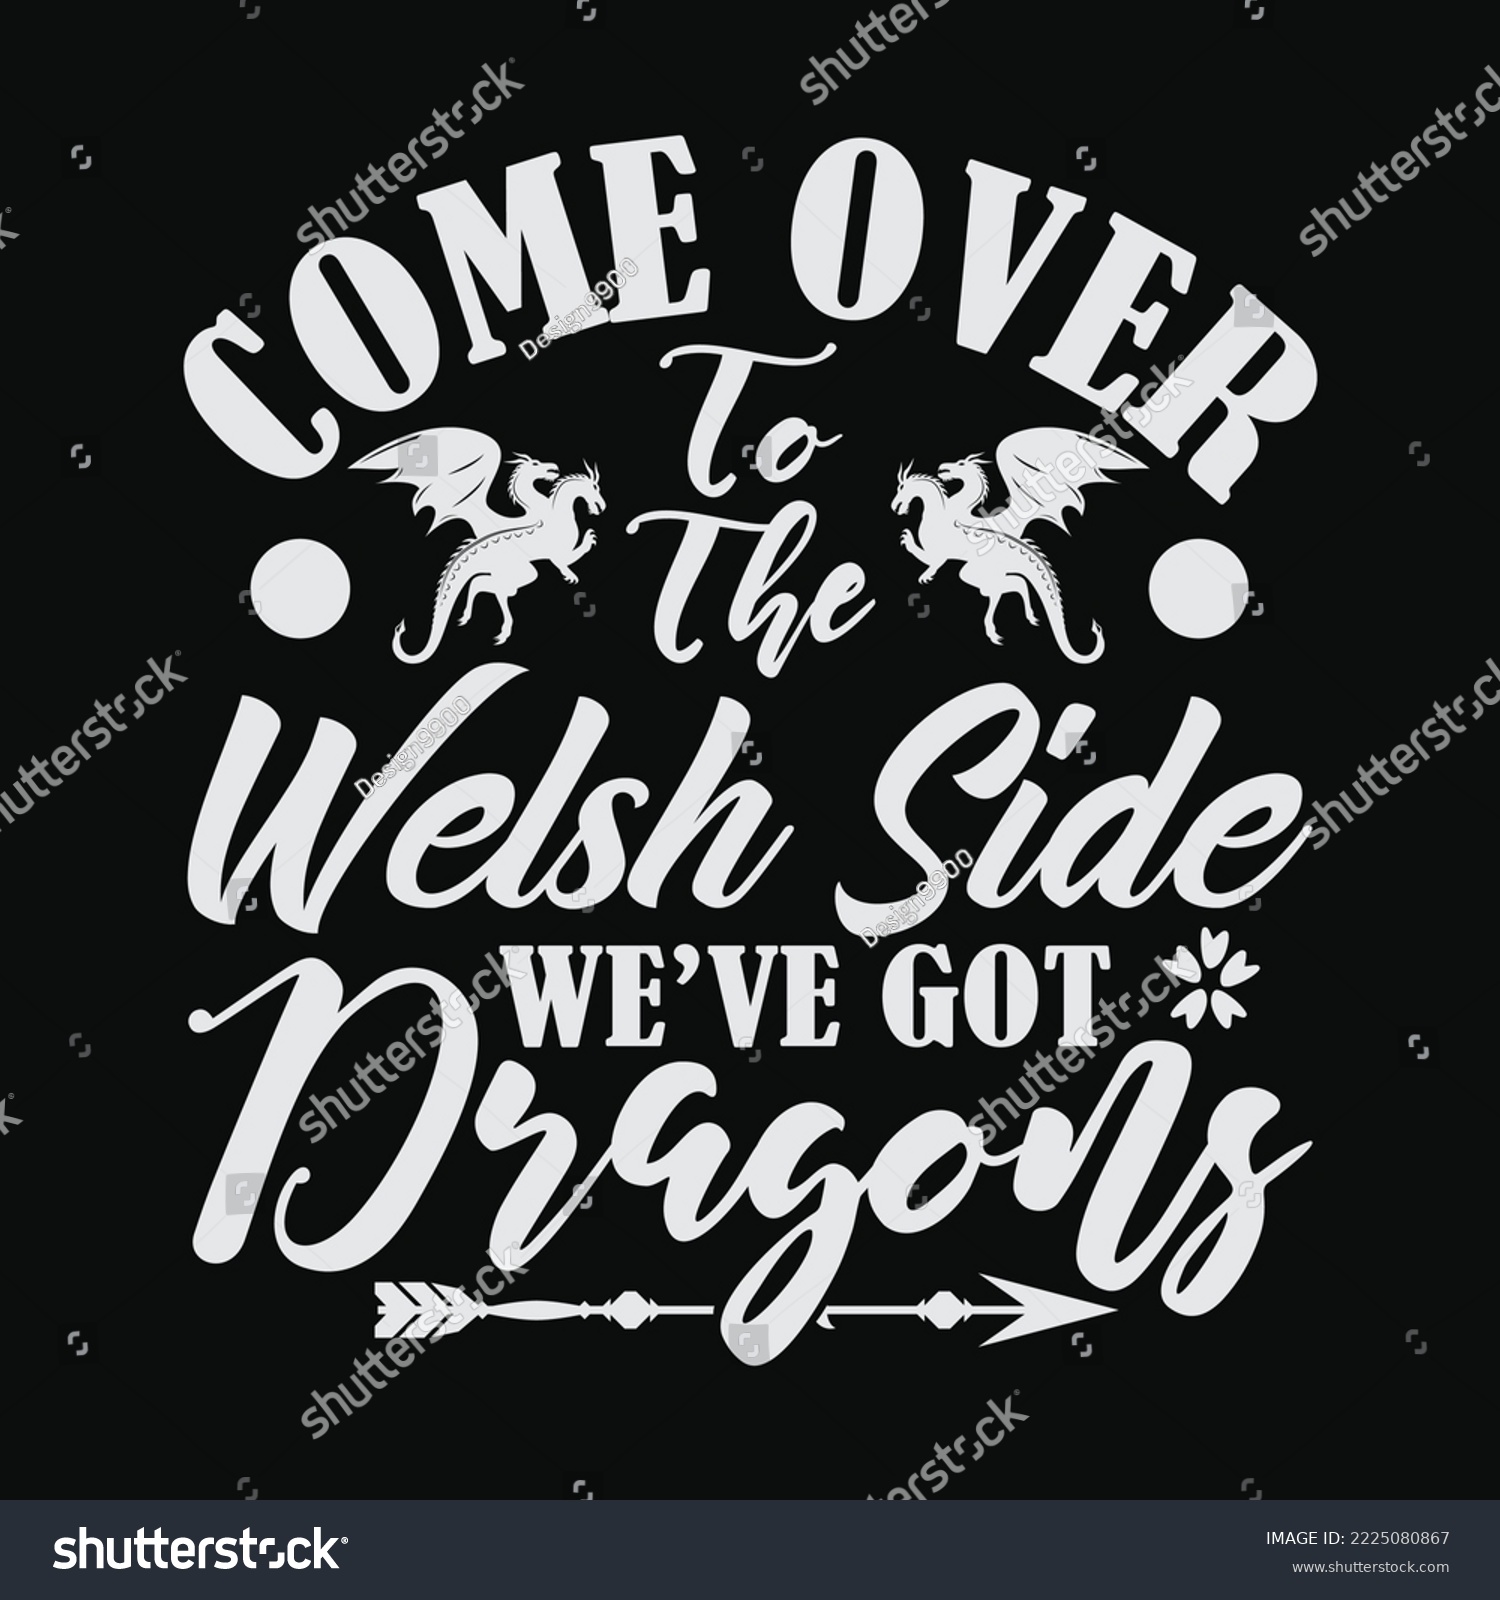 SVG of Wales Rugby Dragons Come Over To Welsh Side 6 Nations Fan svg